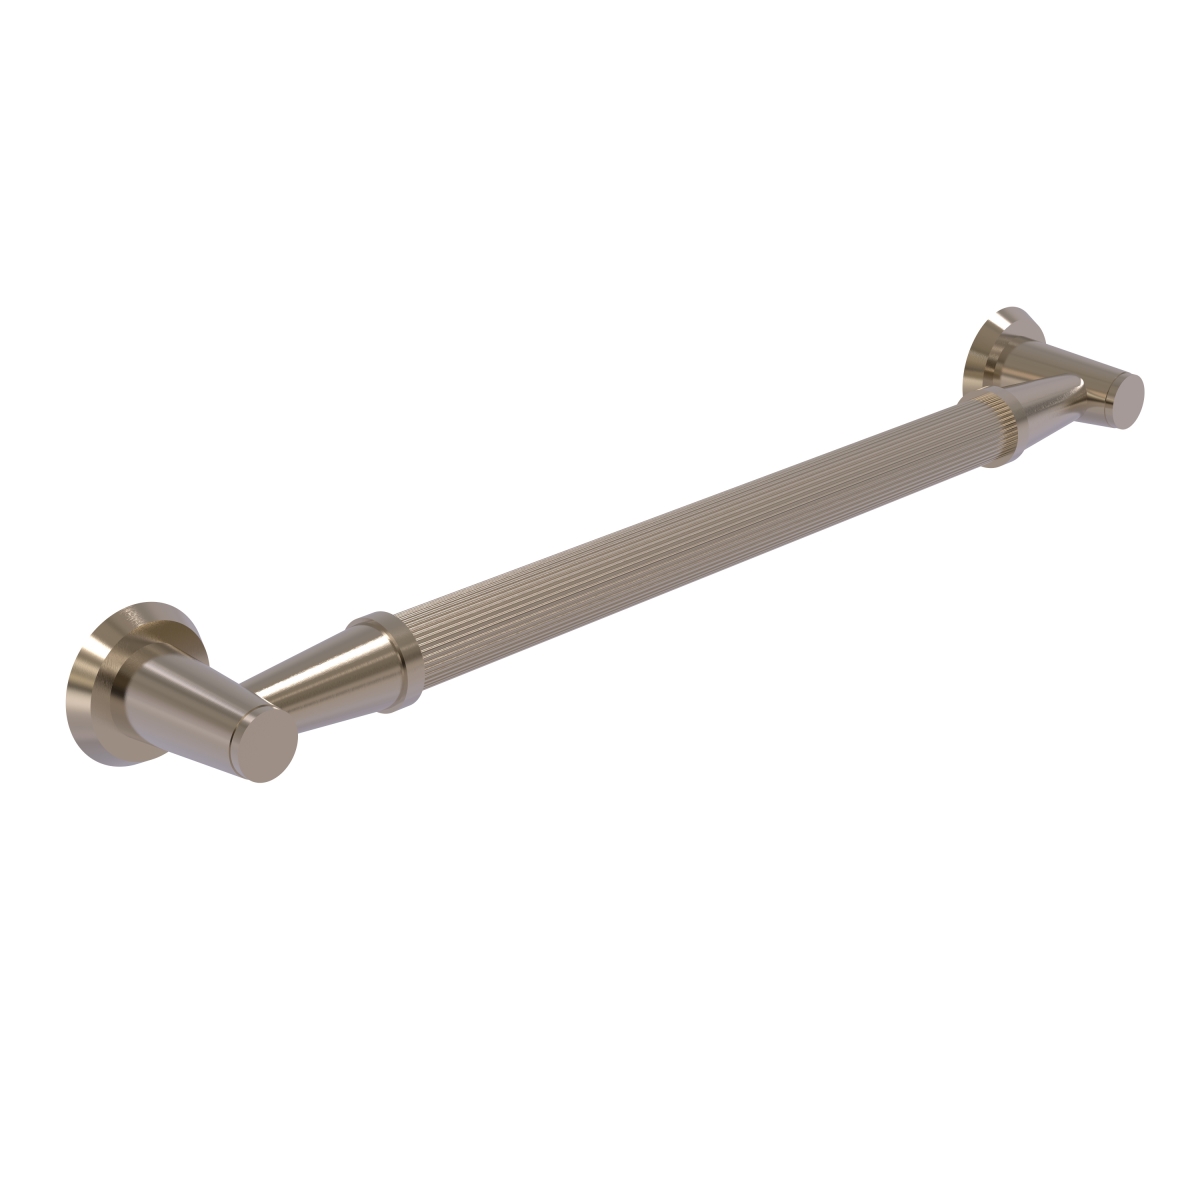 Picture of Allied Brass MD-GRR-24-PEW 24 in. Reeded Grab Bar, Antique Pewter - 3.5 x 26 x 24 in.